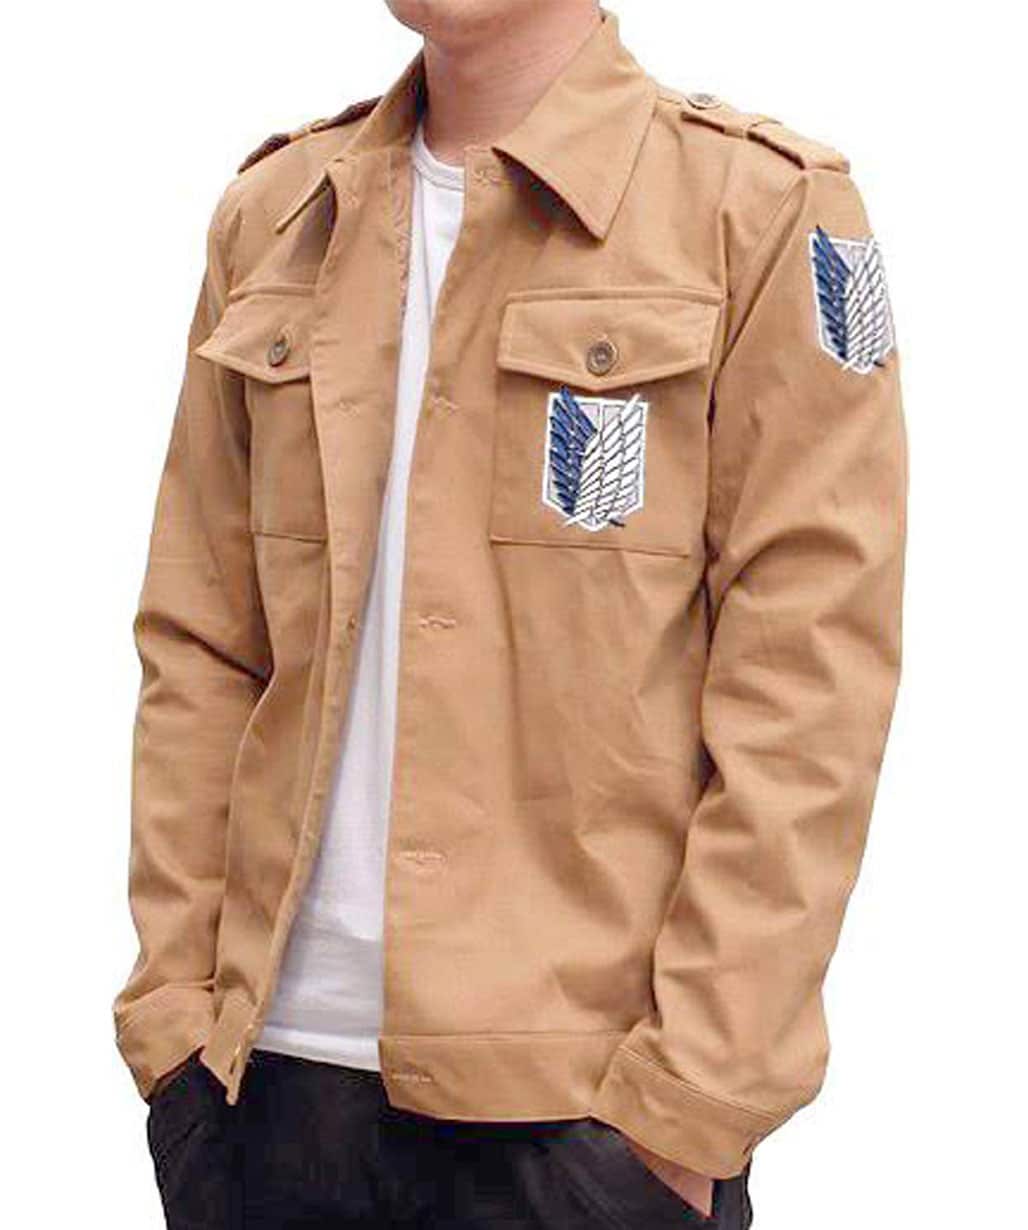 Male-or-Female-Attack-On-Titan-Jackets